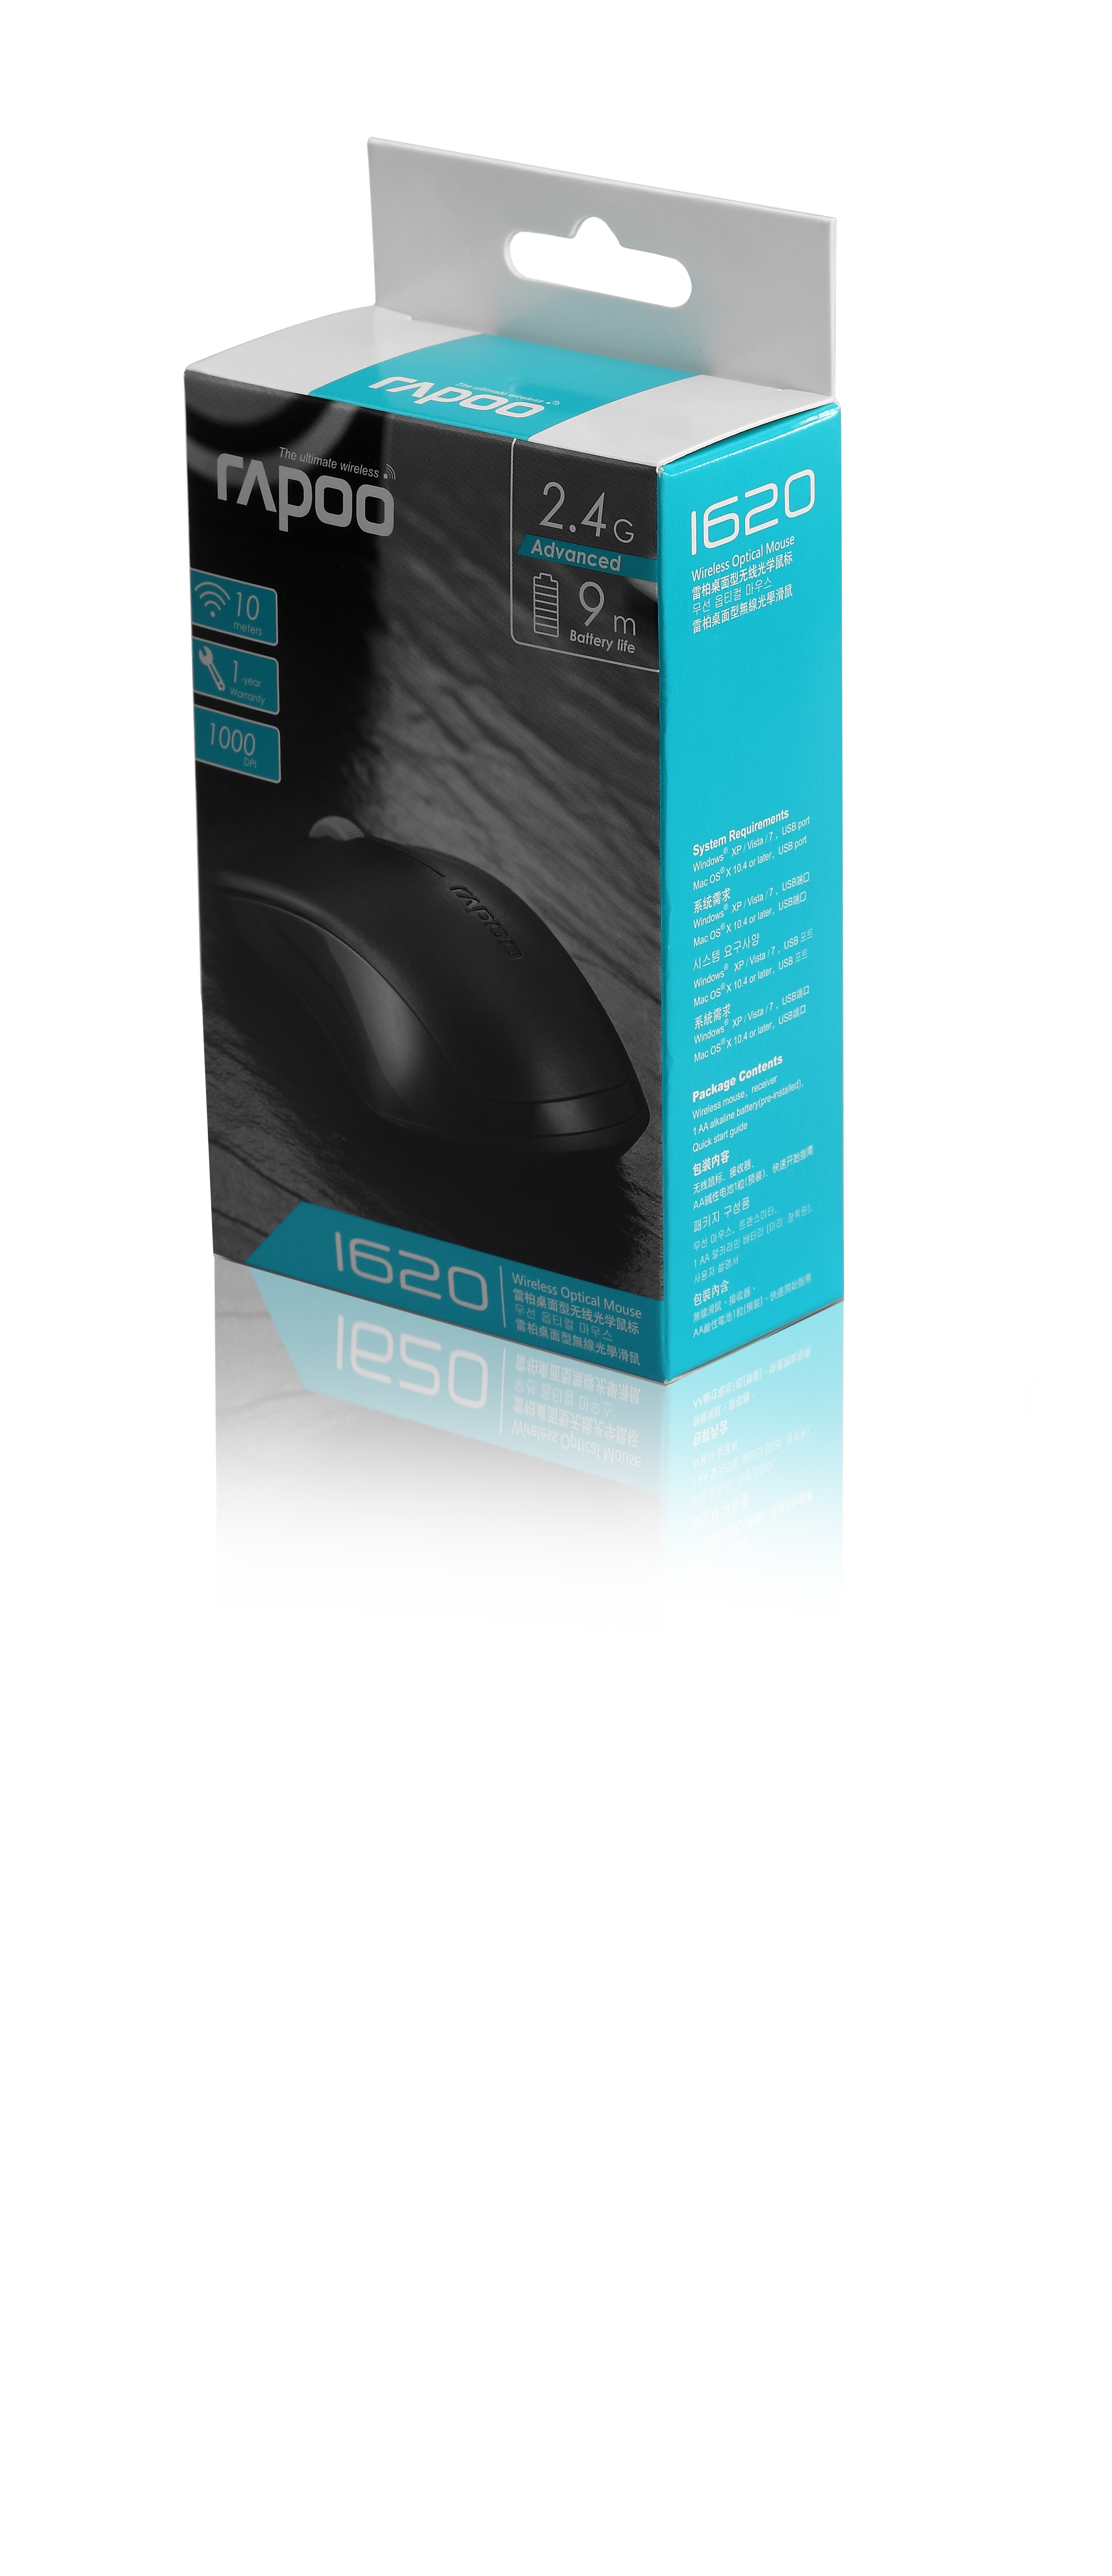 WLESS OPTICAL MOUSE 1620 BLACK